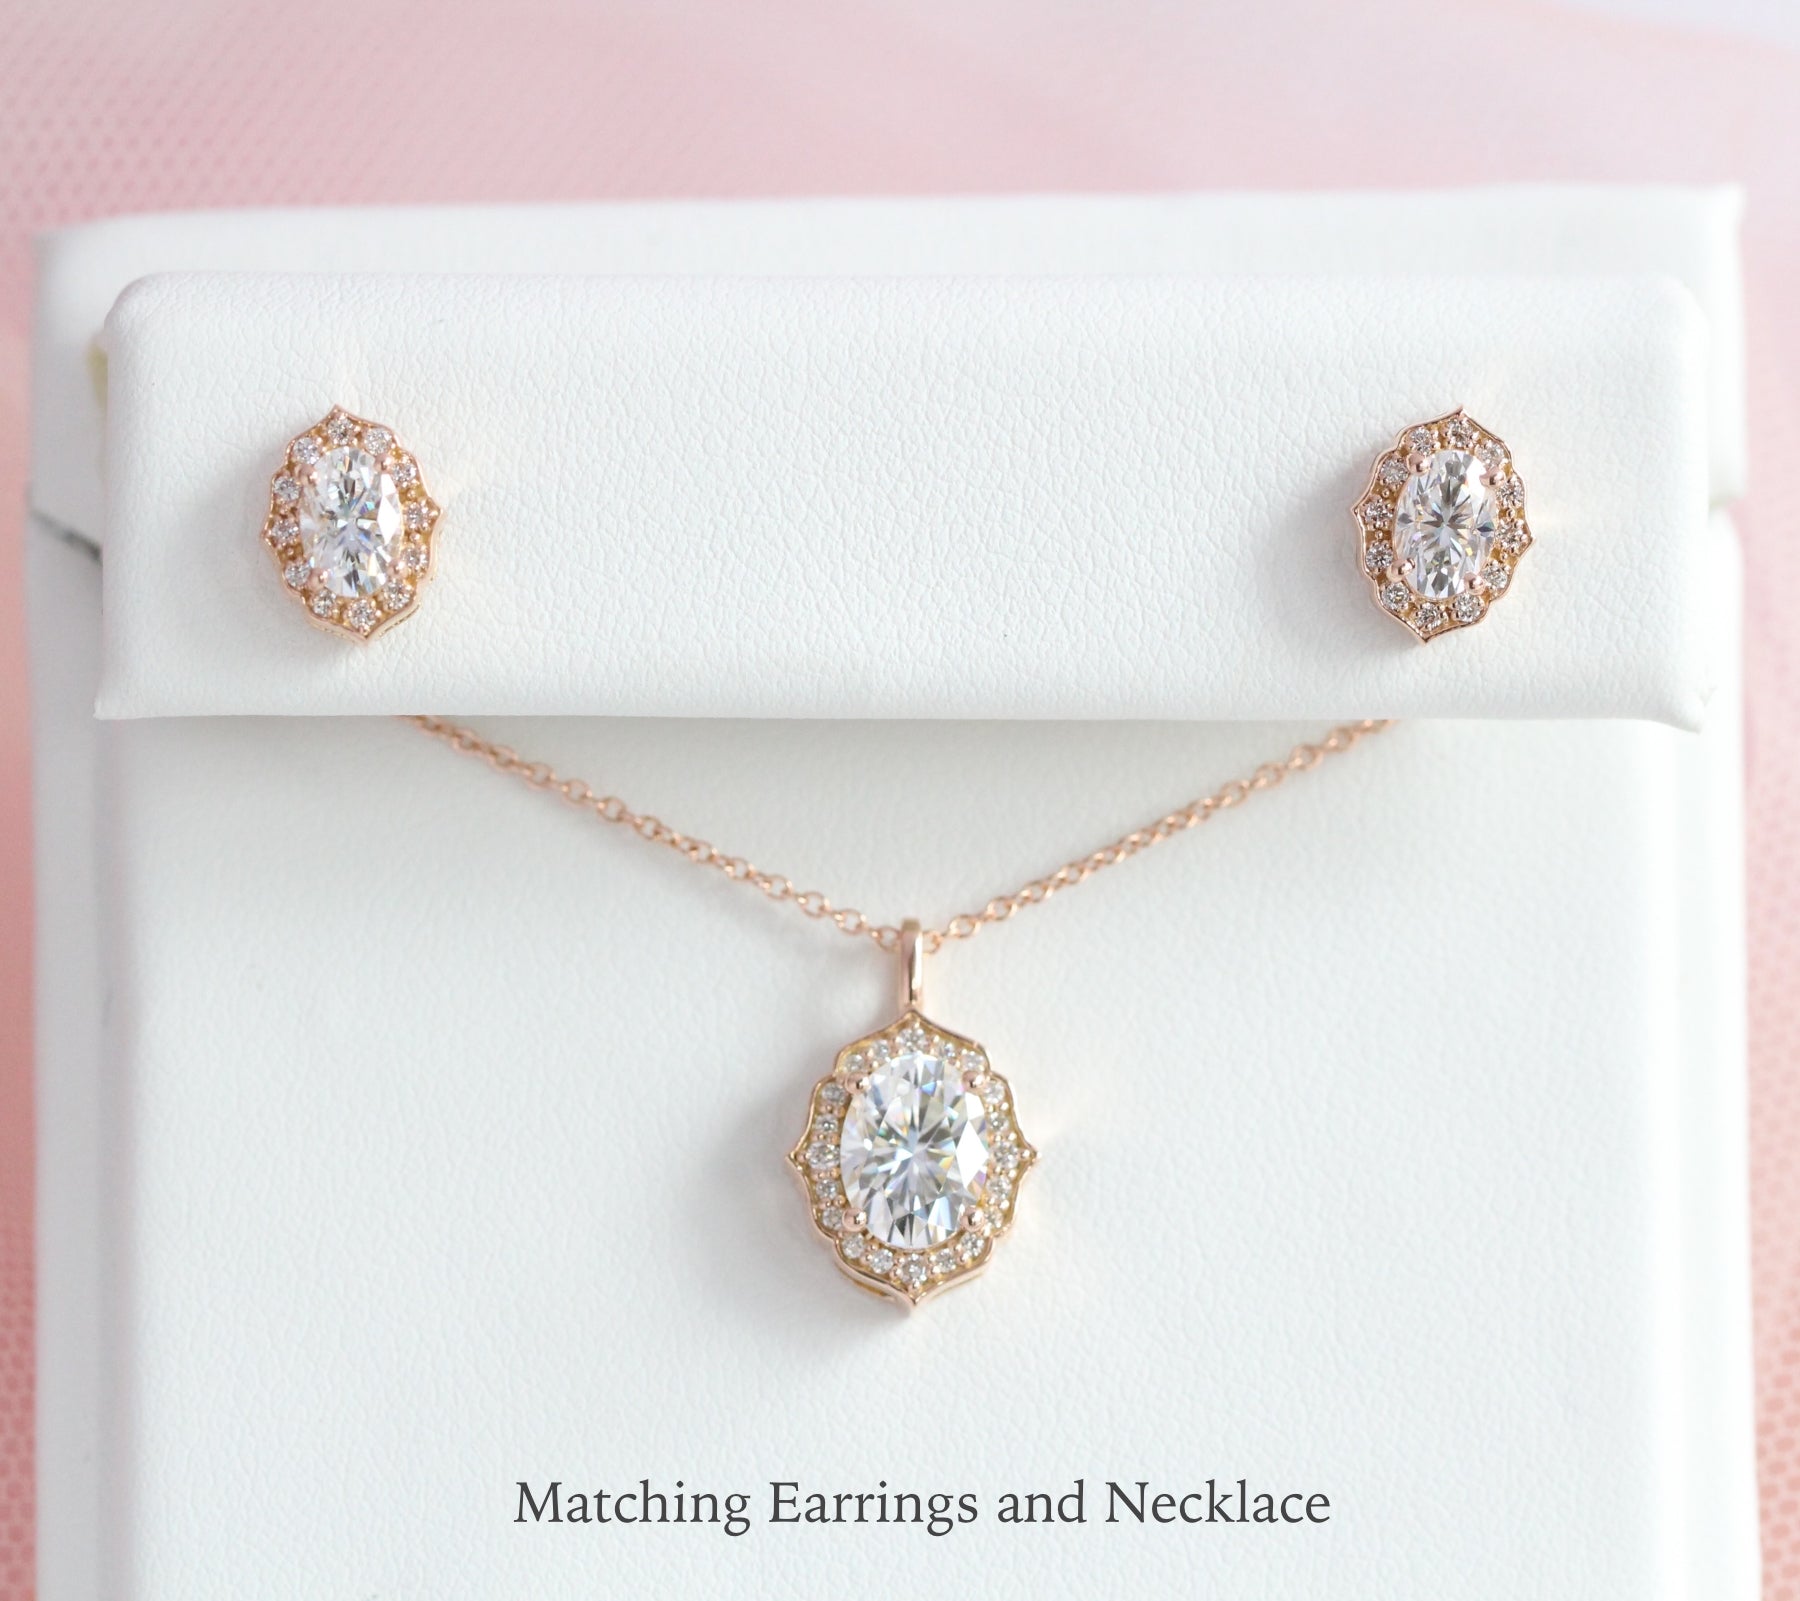 Matching Diamond Earrings and Necklace Rose Gold Wedding Jewelry Set La More Design 